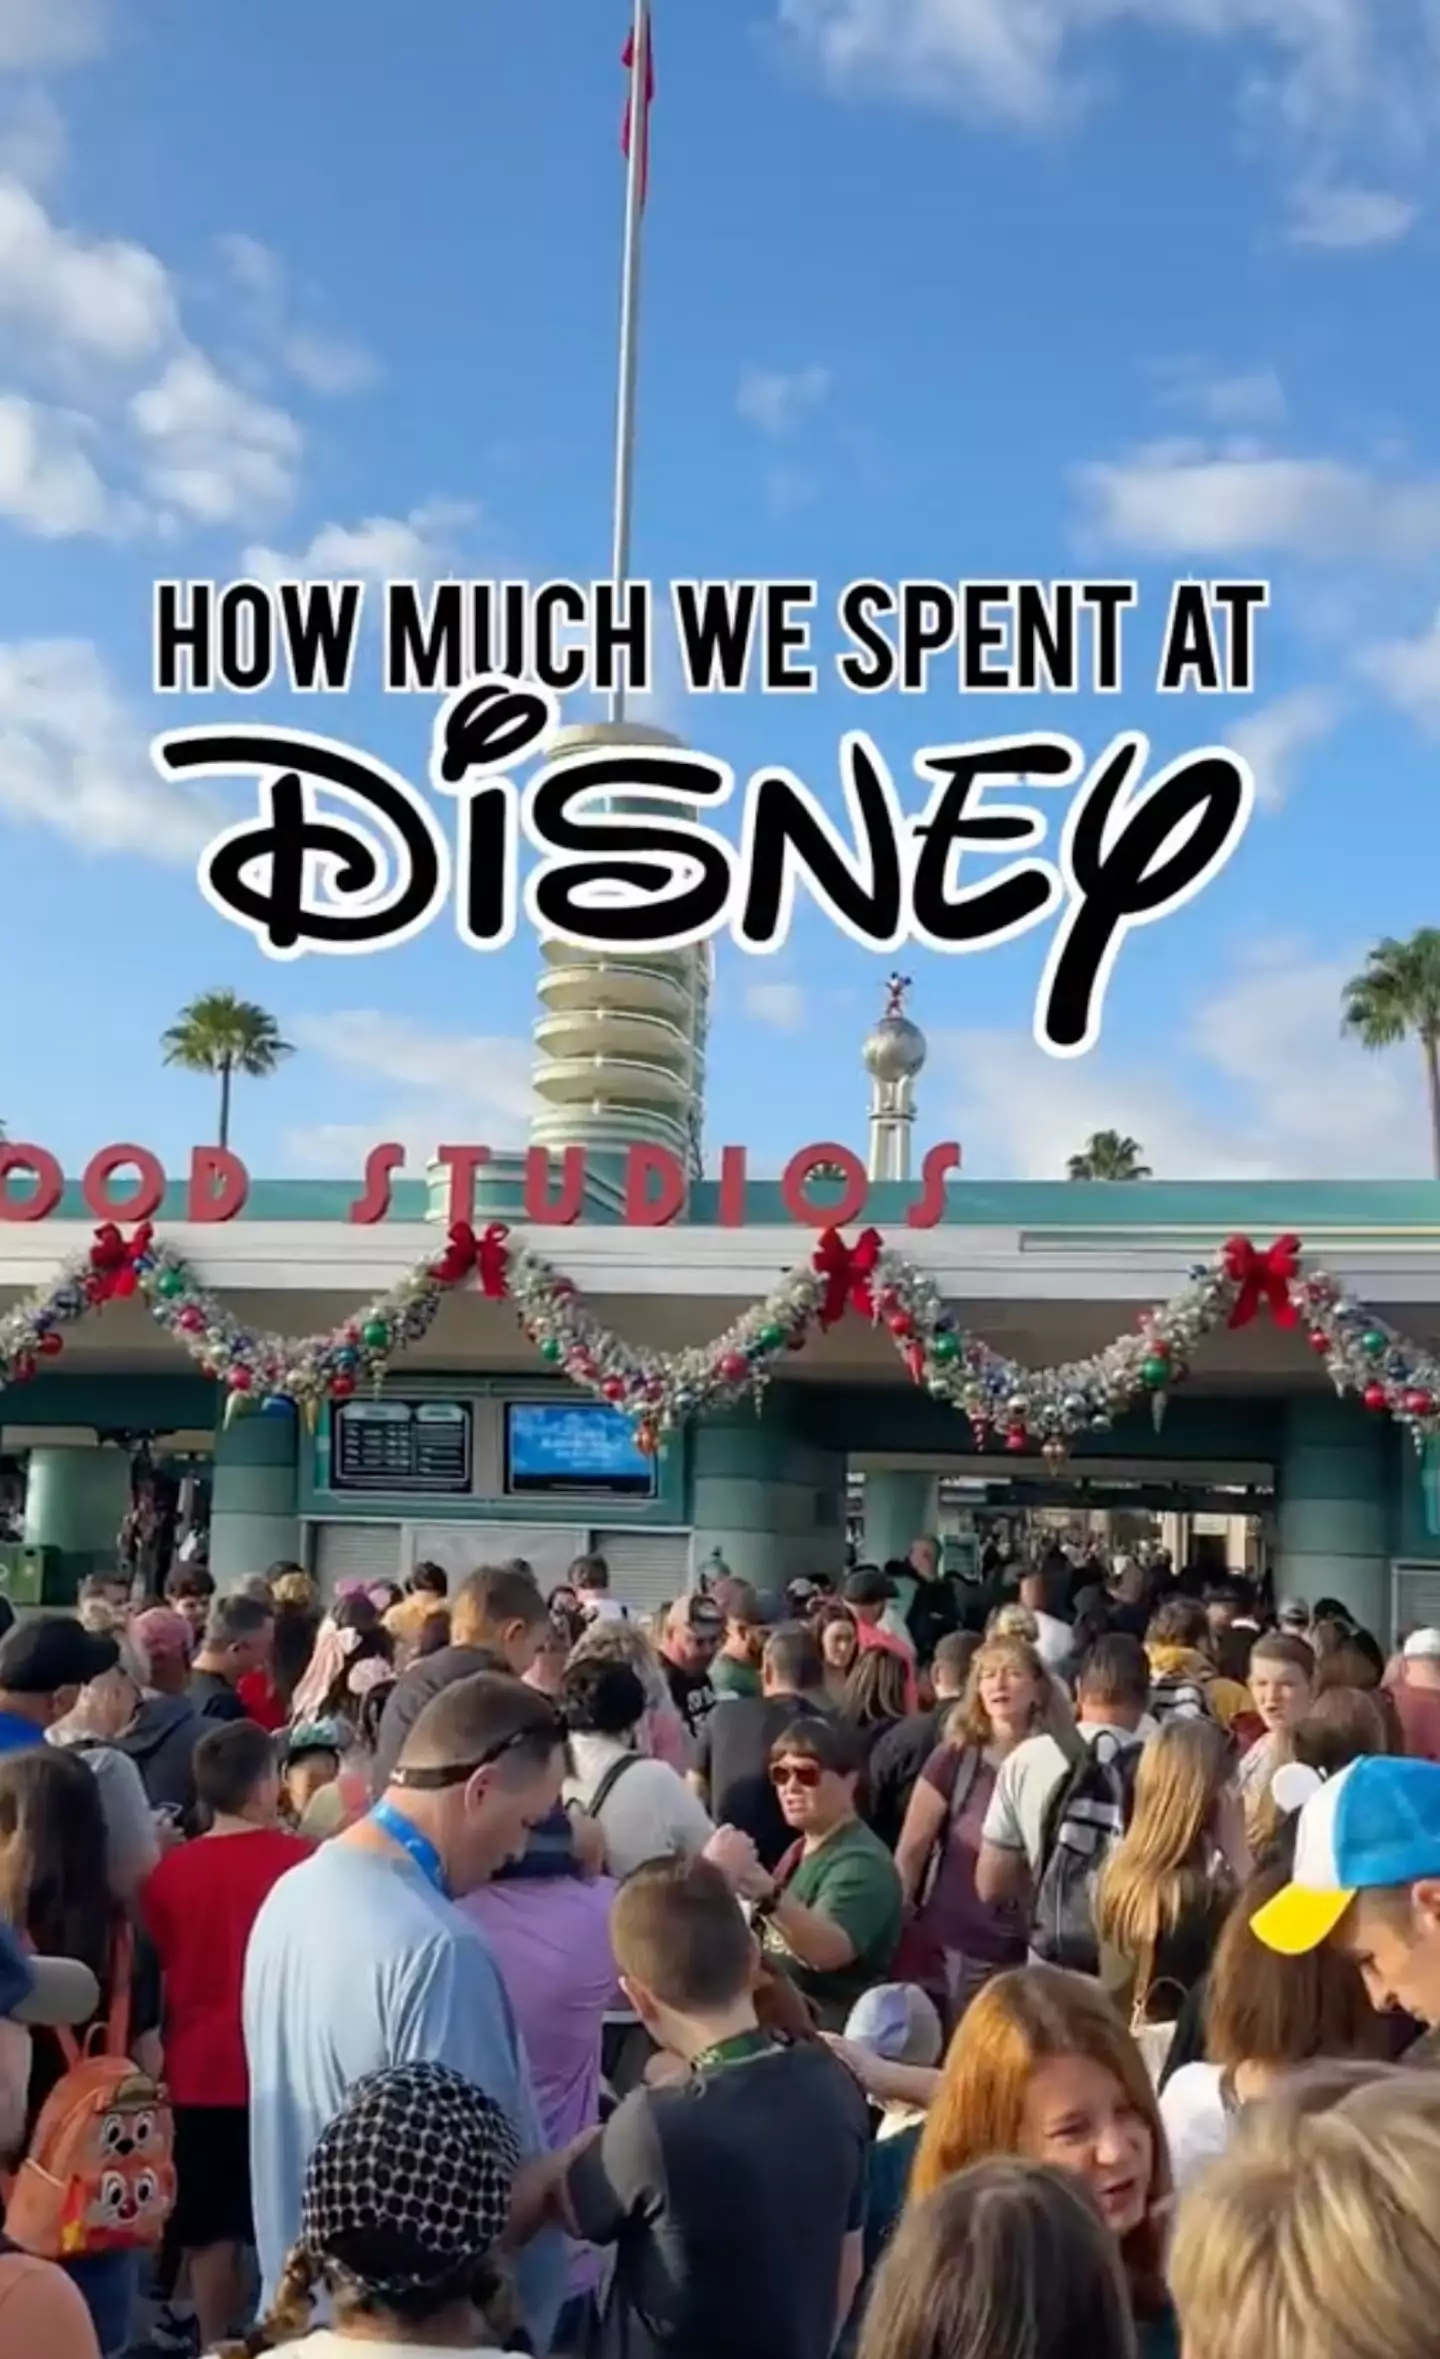 One mum revealed she spent thousands in a single day at Disney World.